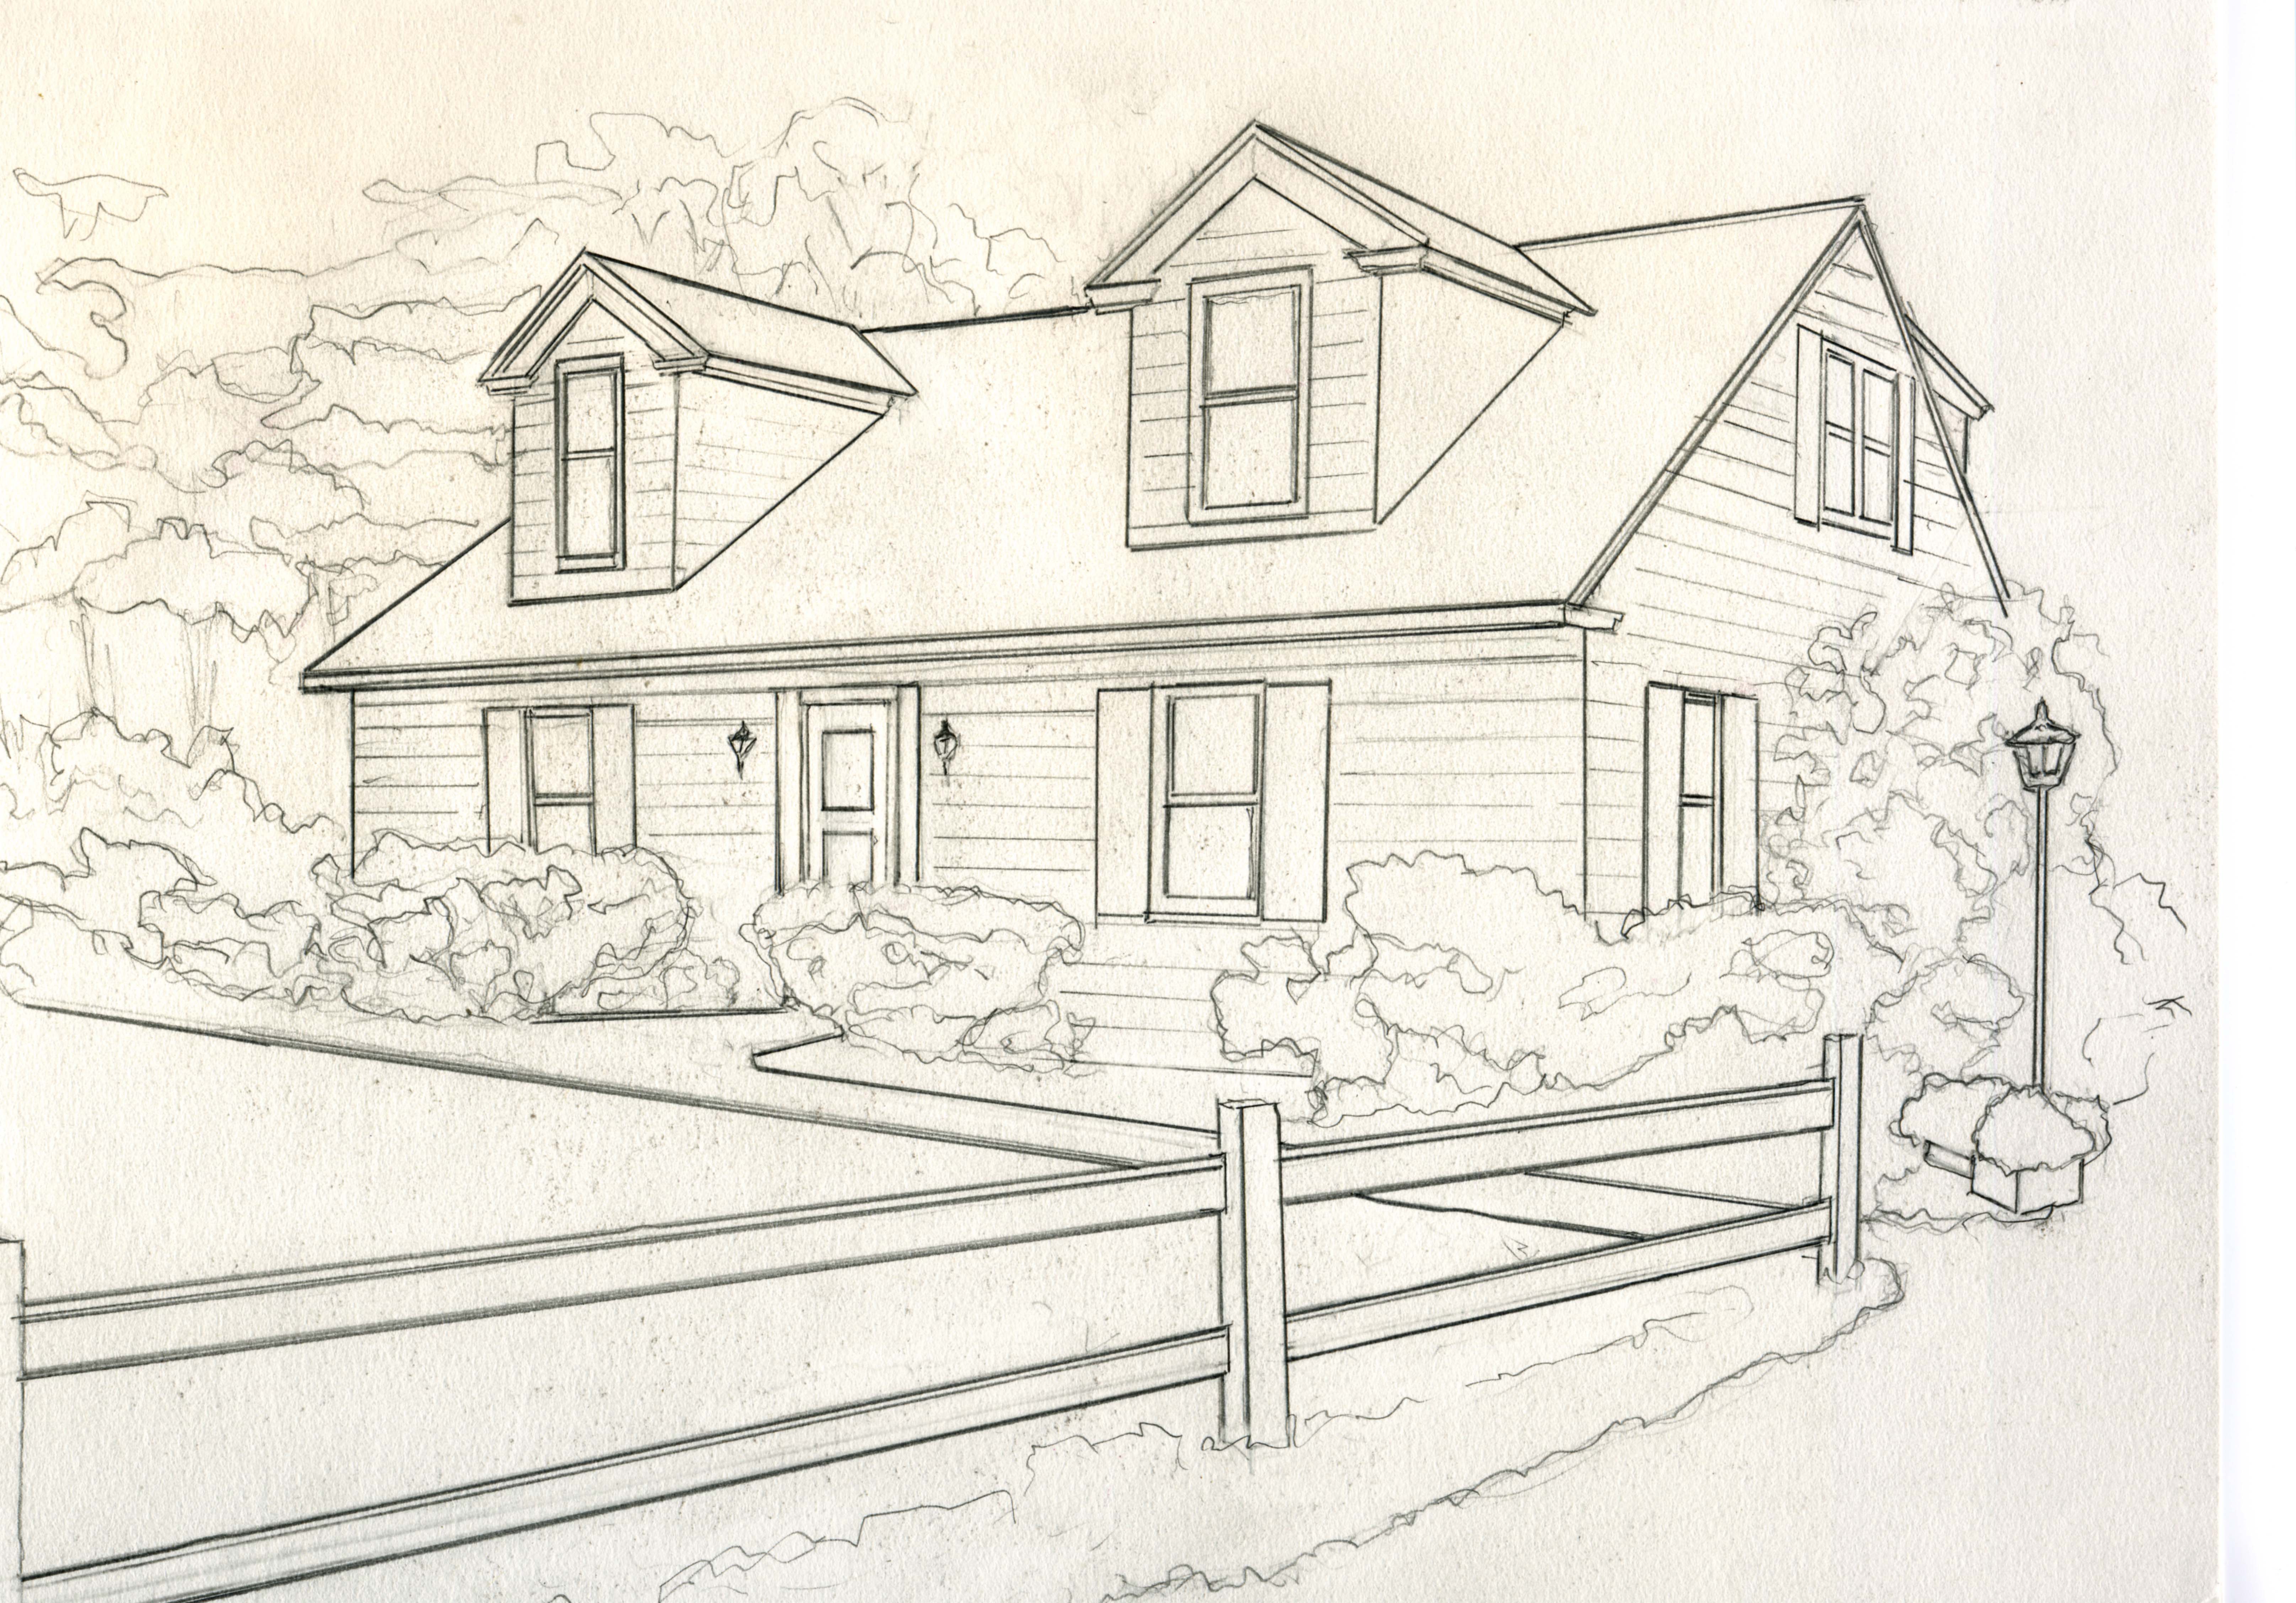 Sketch Of House To Draw